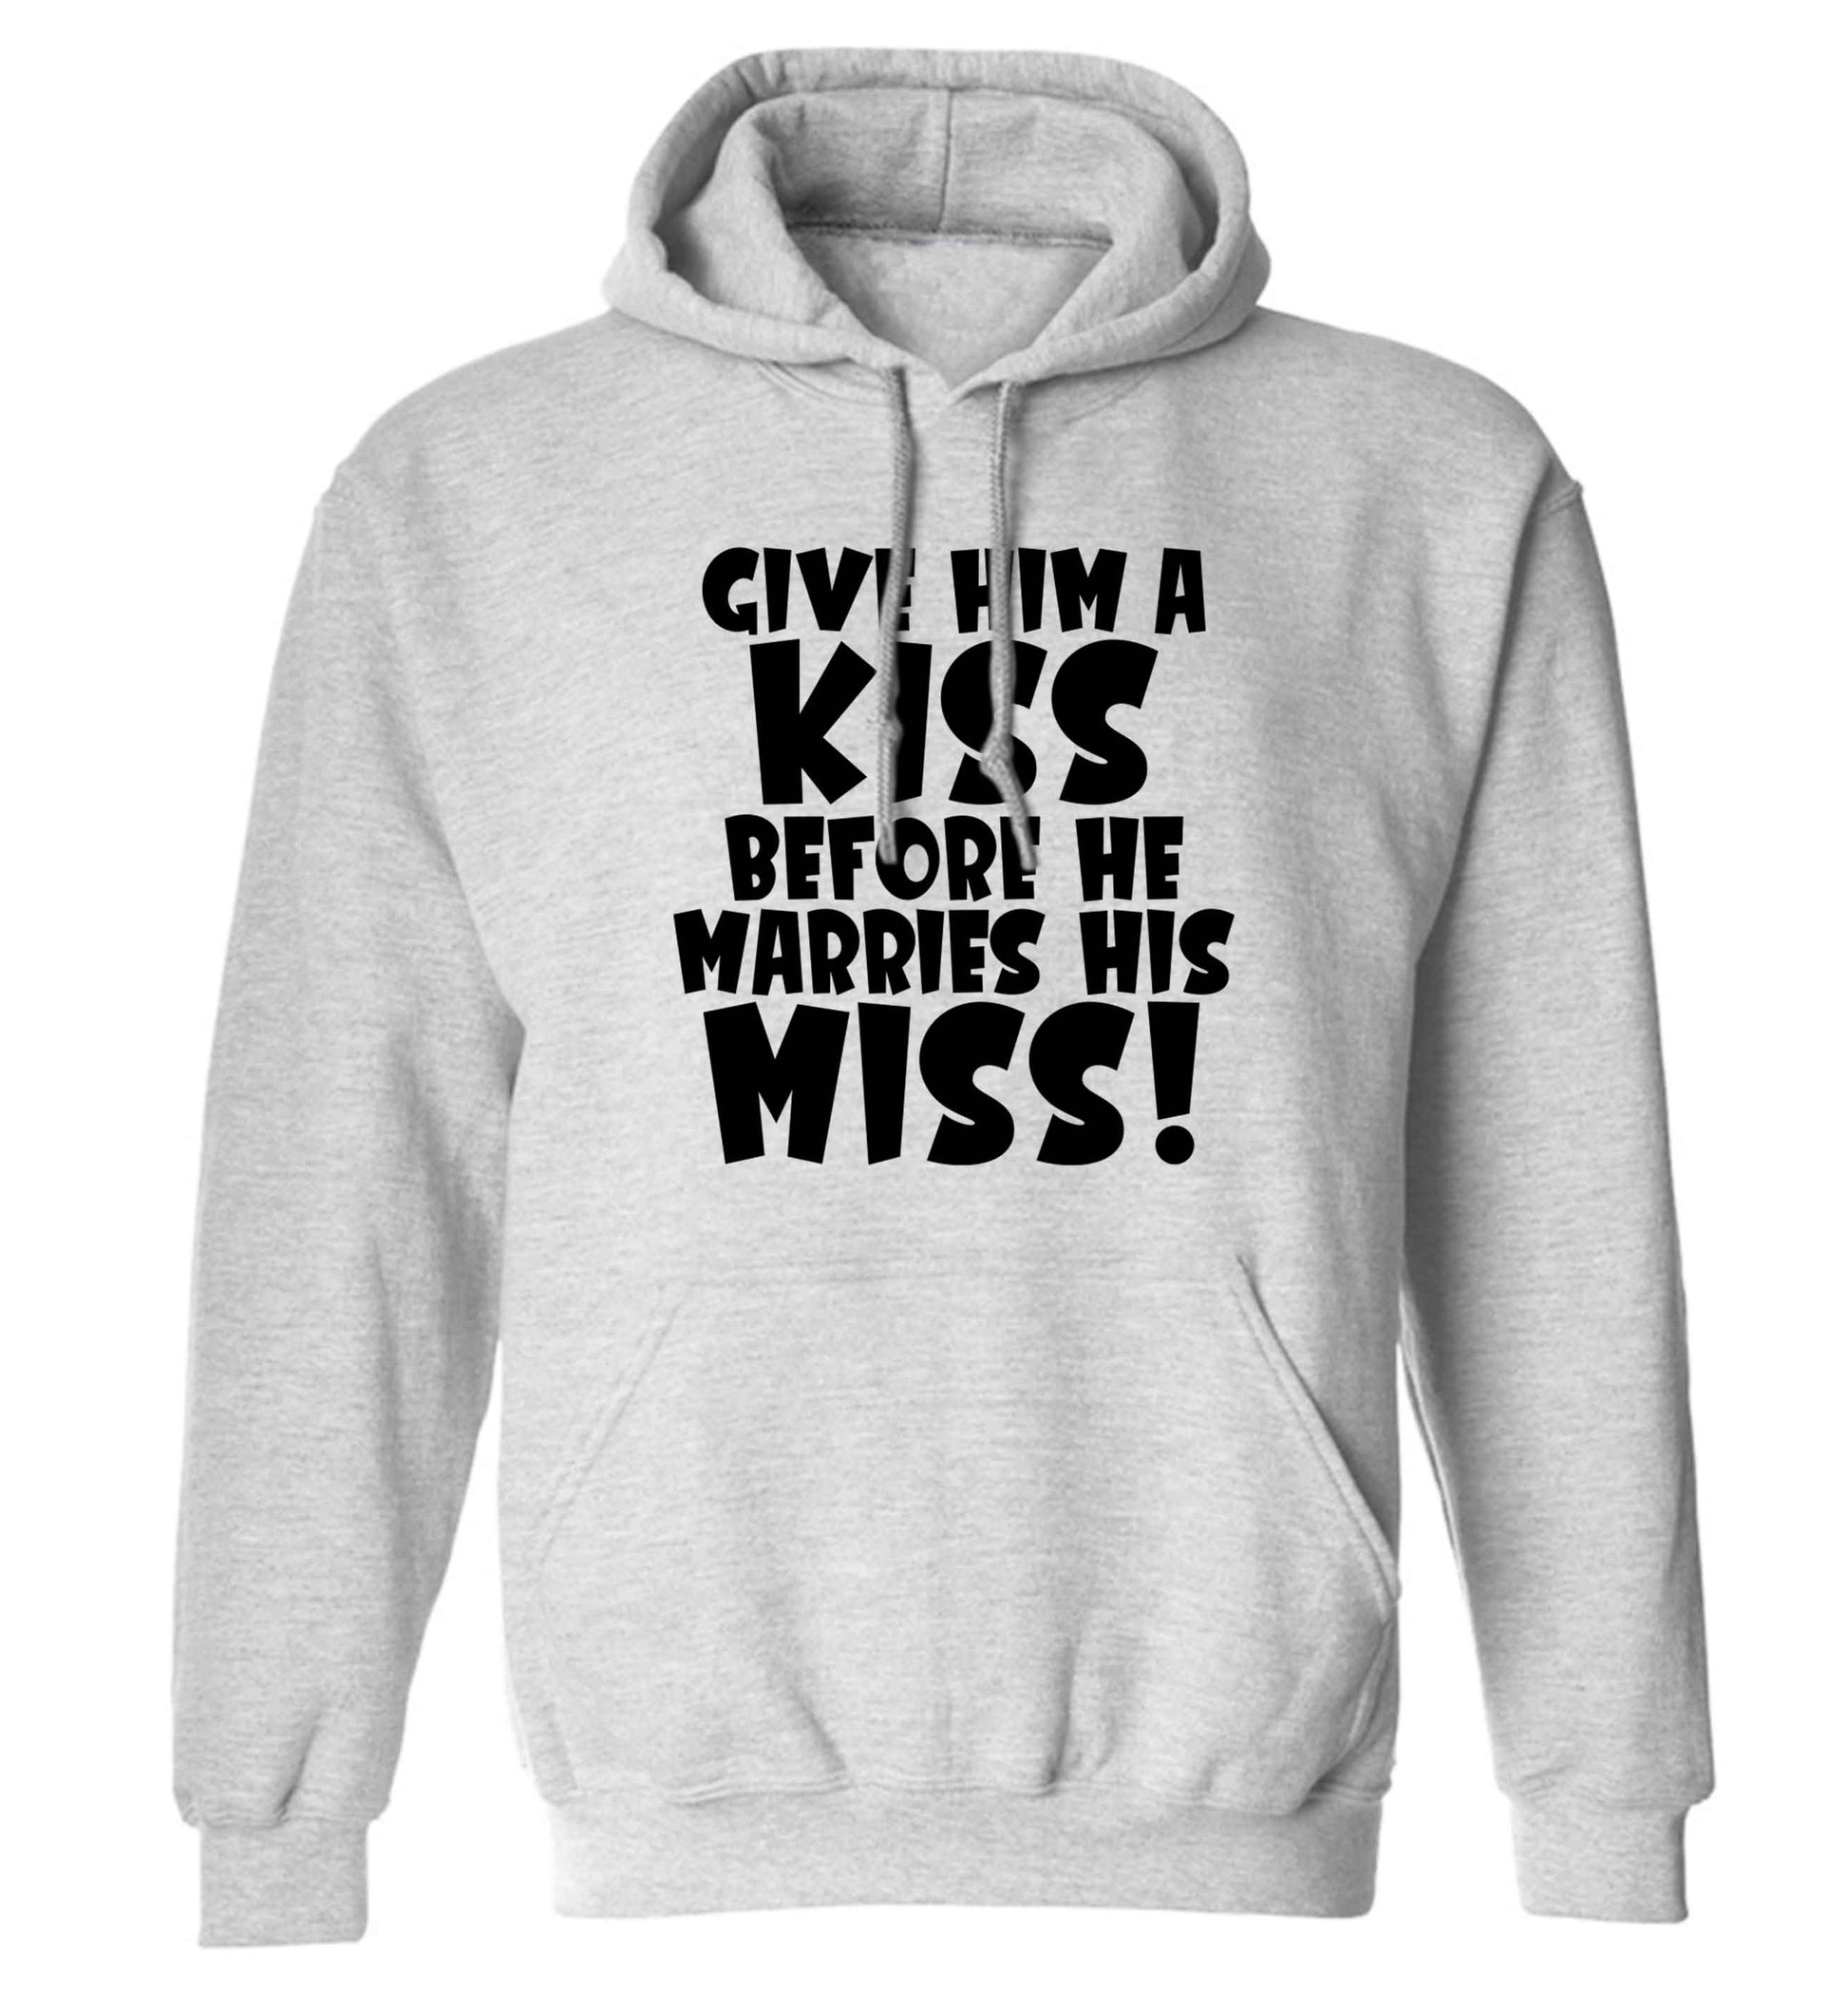 Give him a kiss before he marries his miss adults unisex grey hoodie 2XL